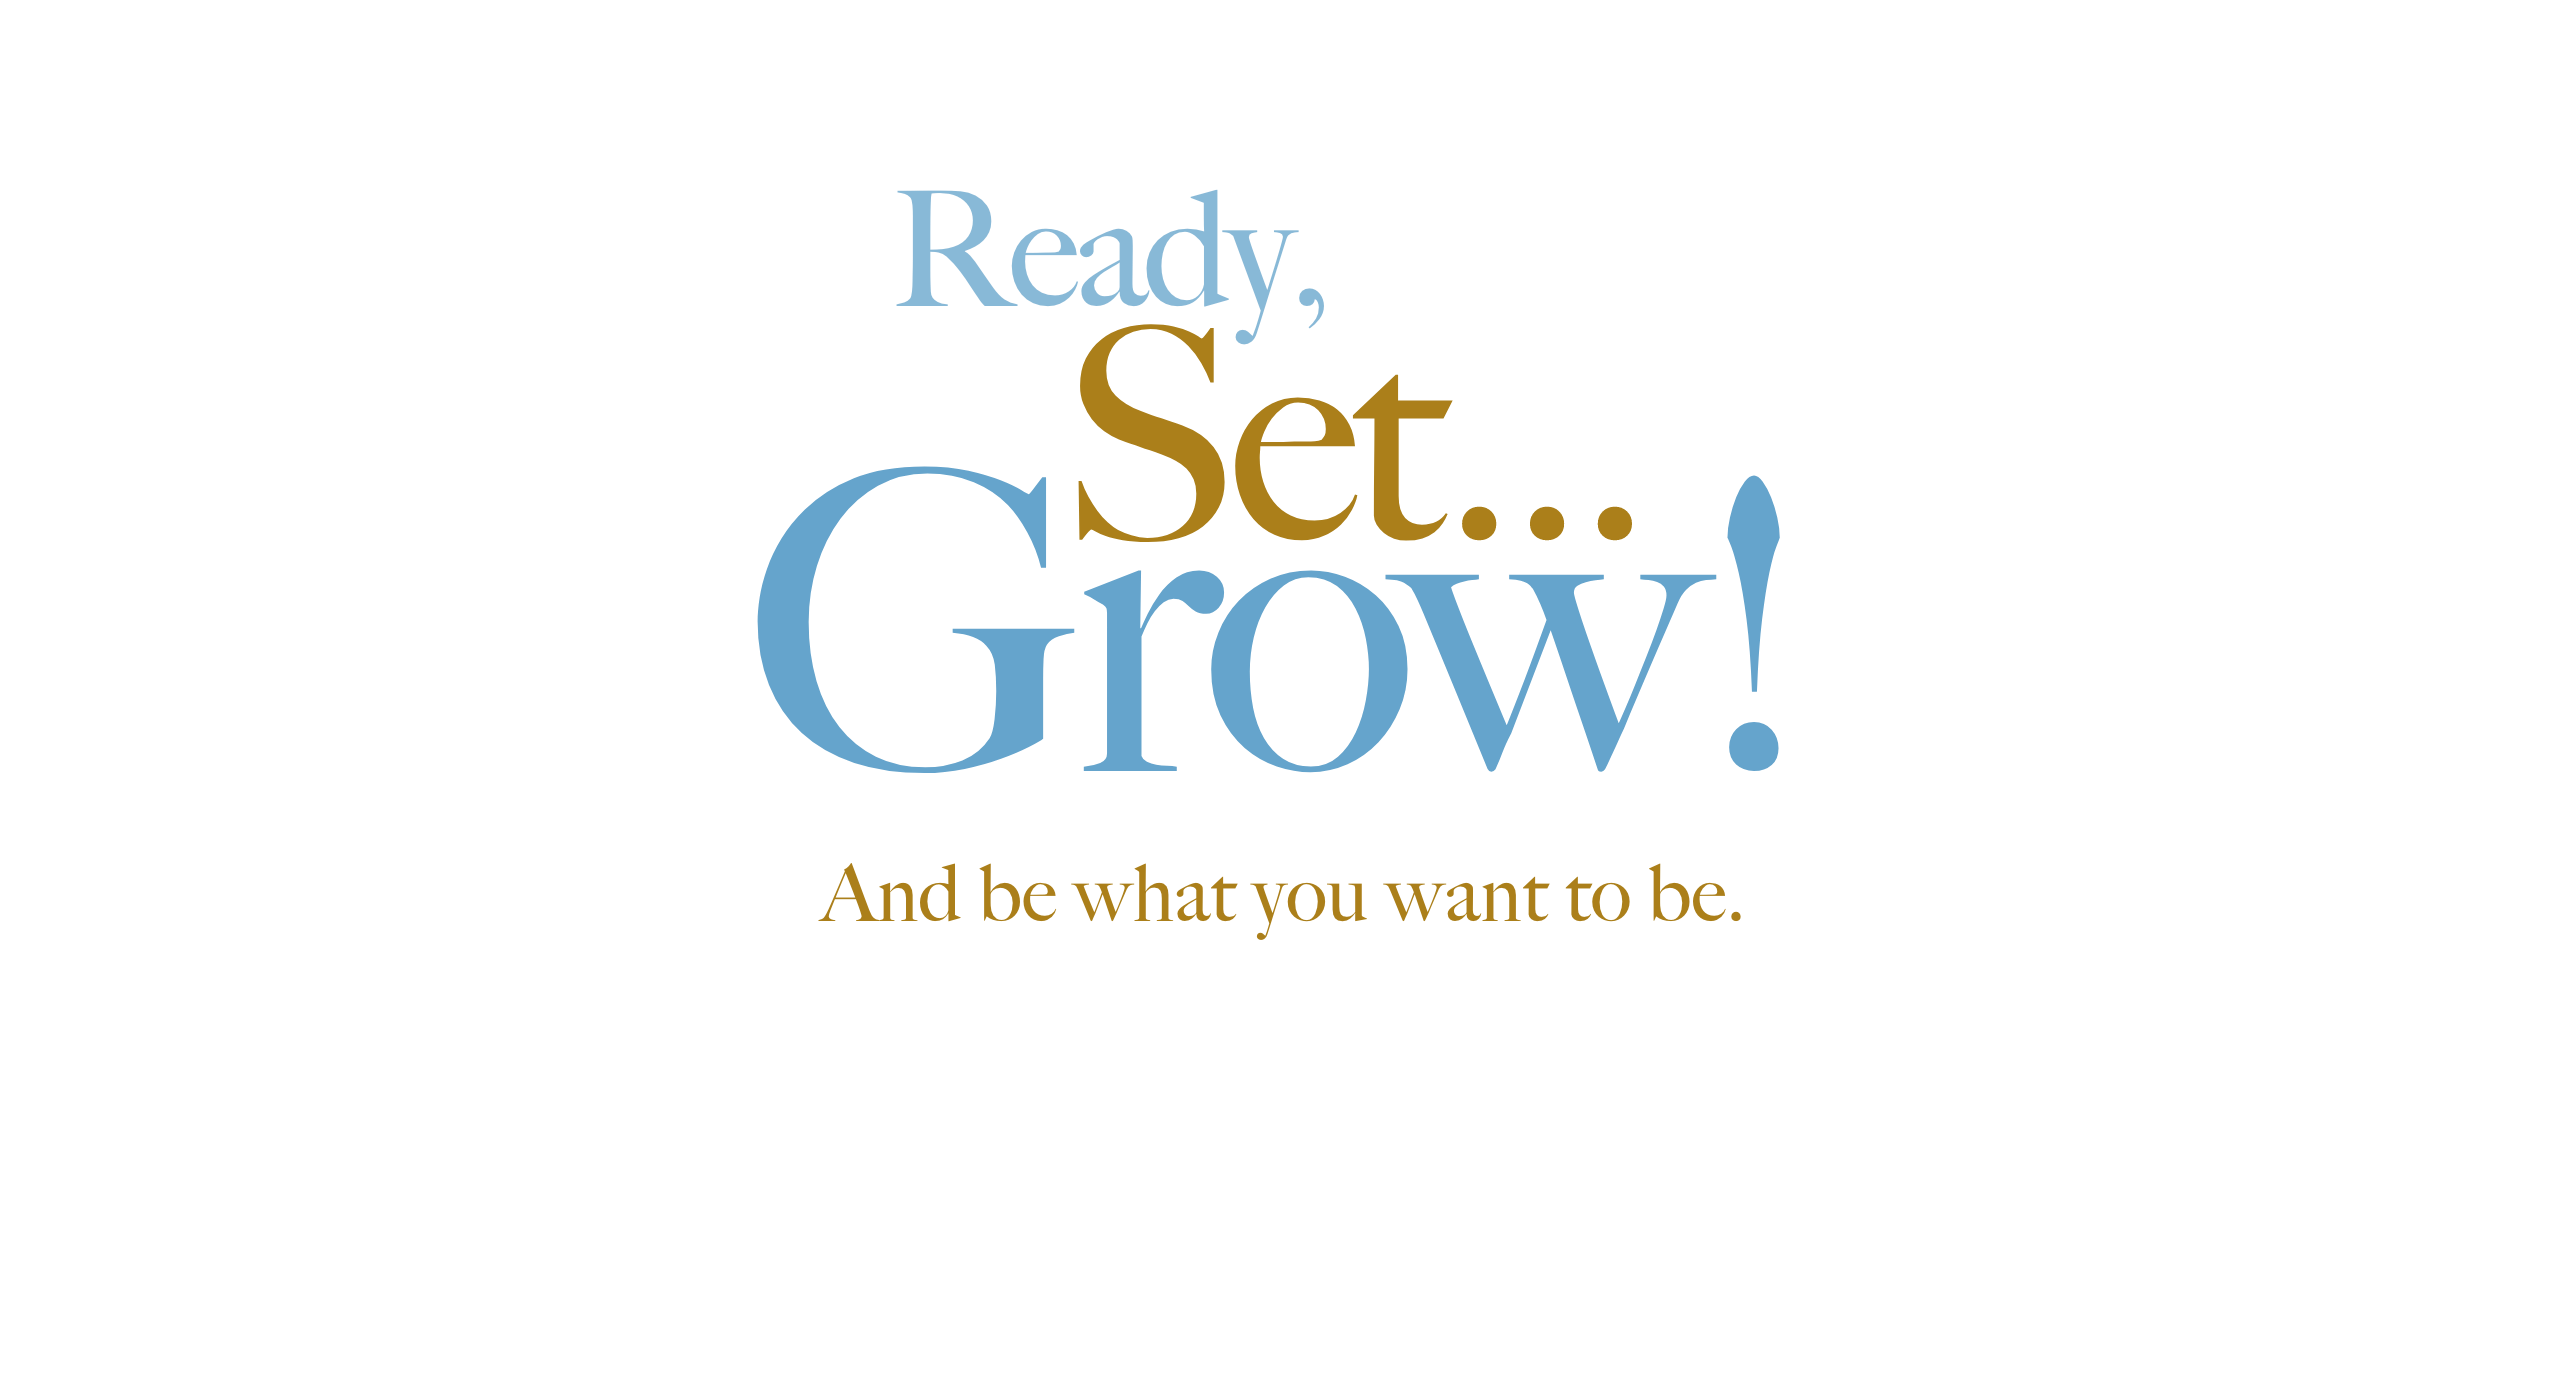 Ready, Set... Grow! And be what you want to be.